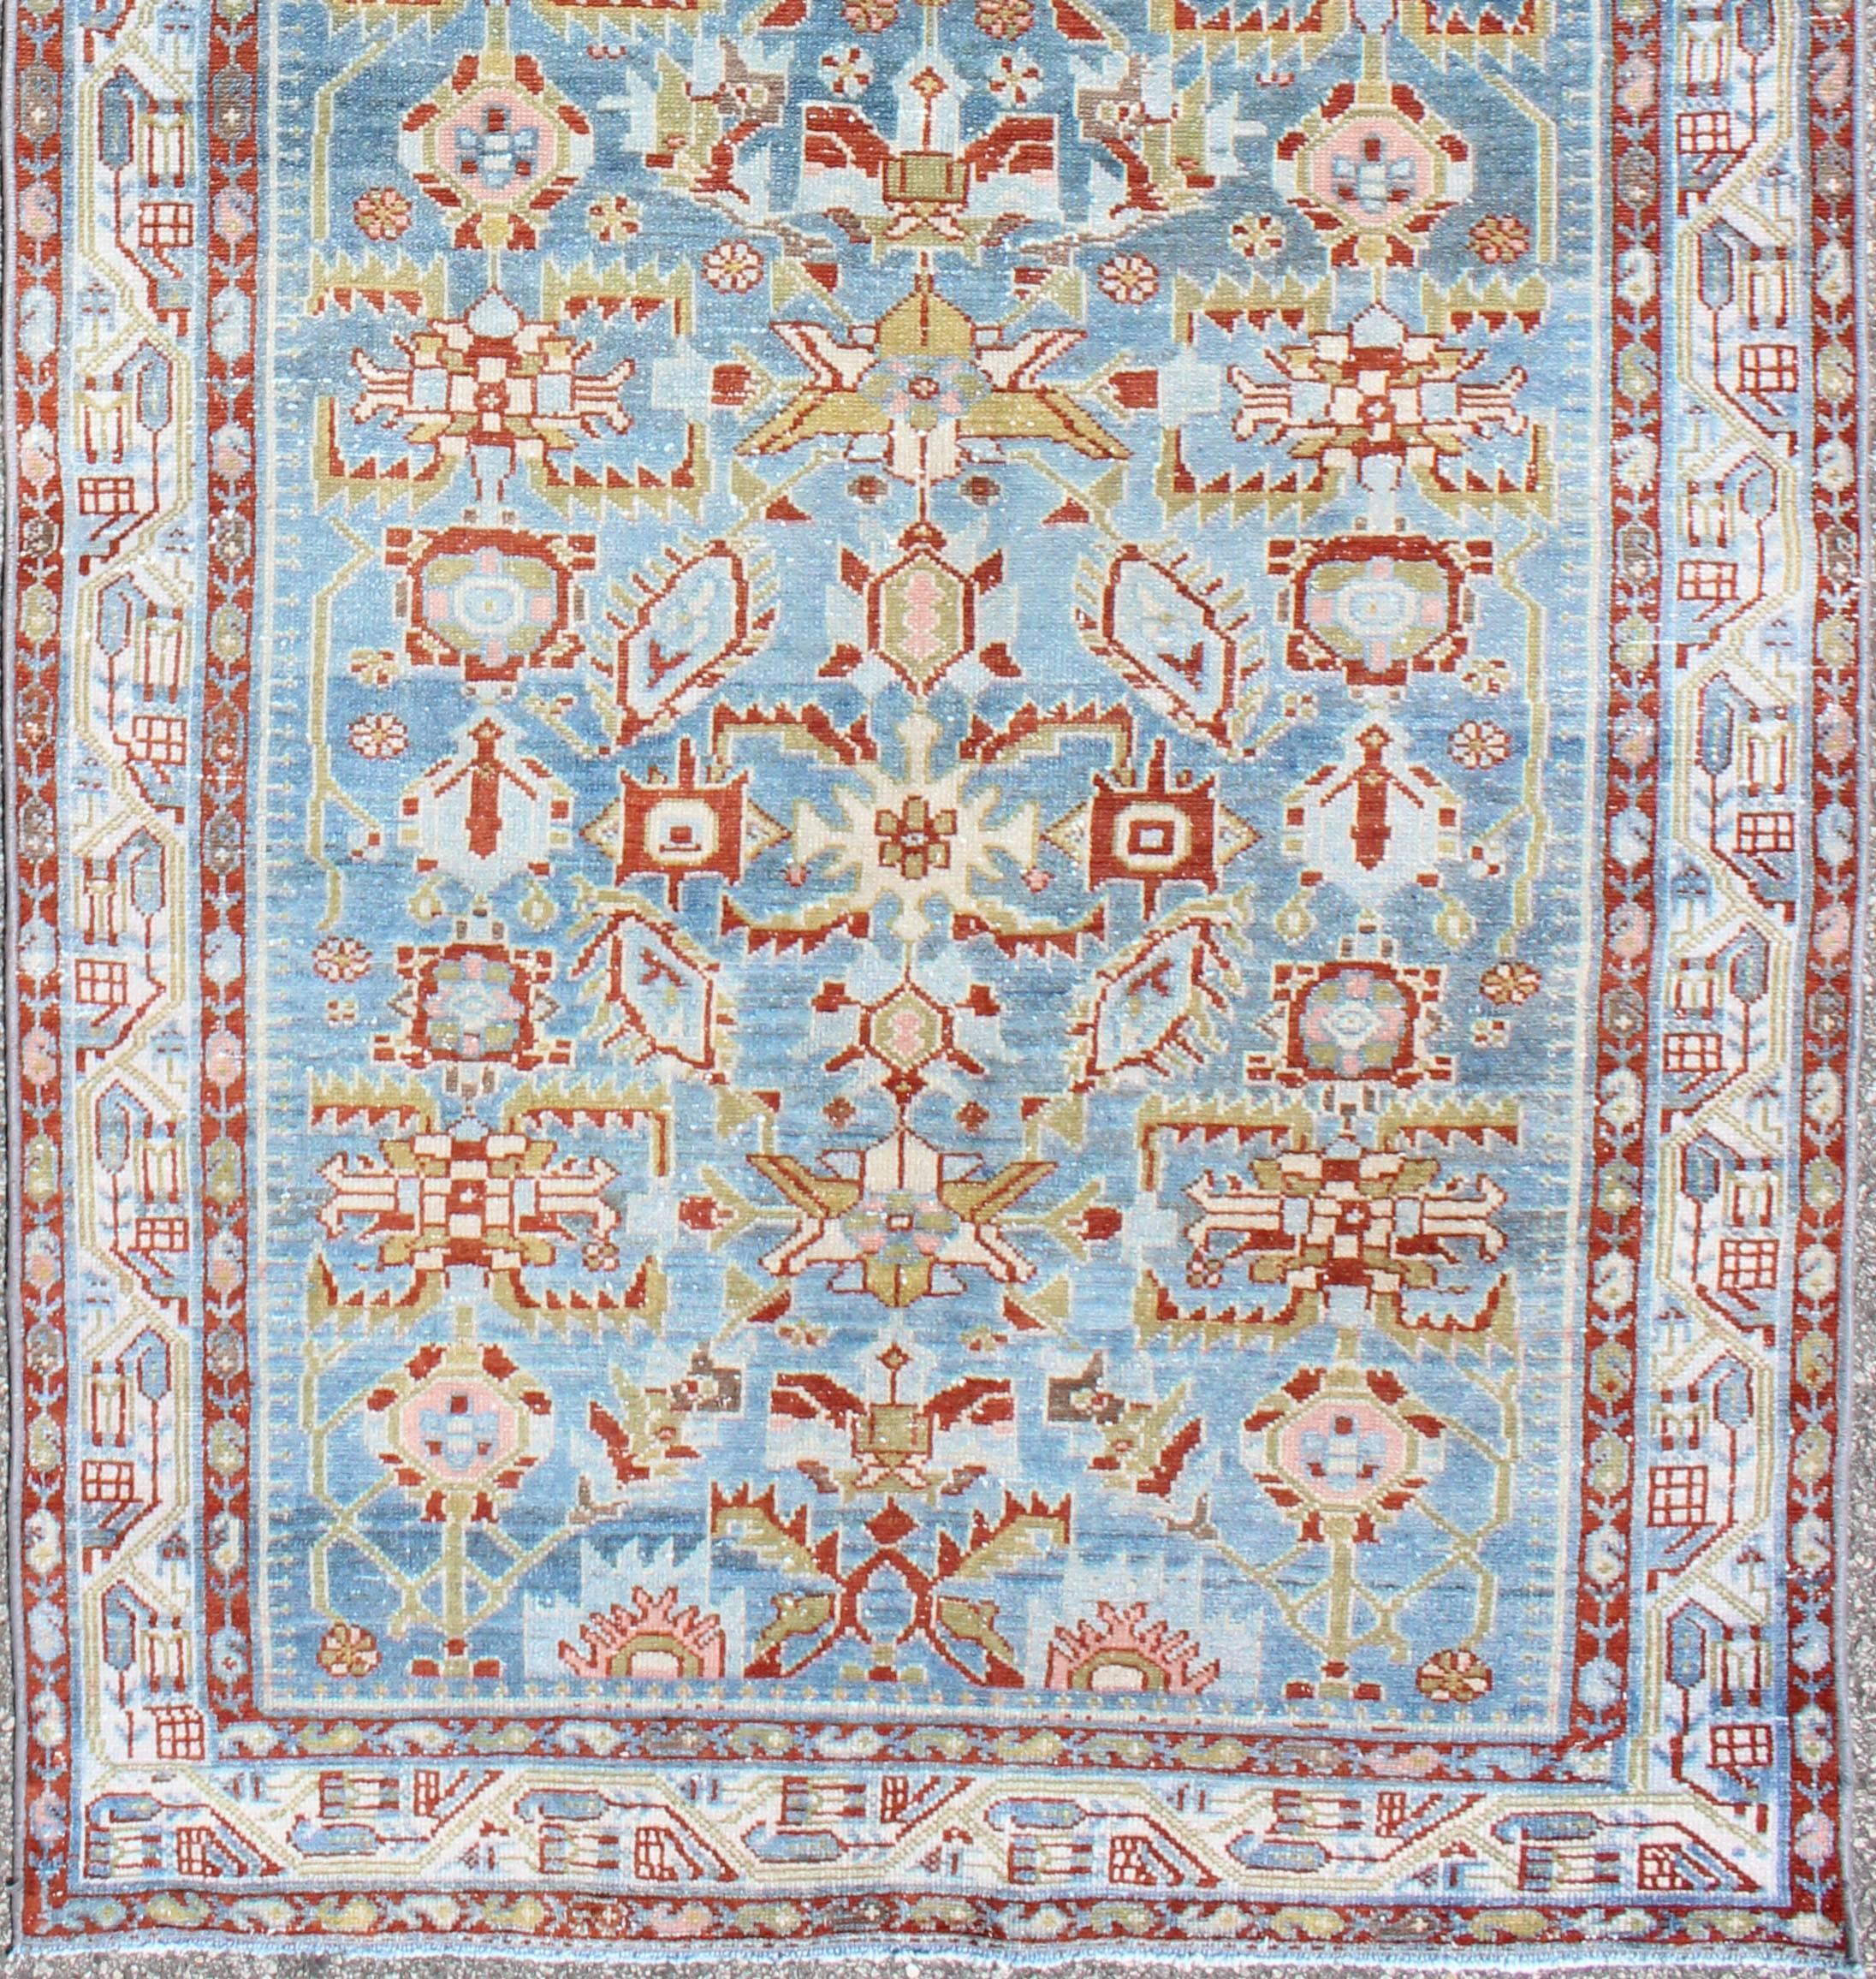 Antique Persian Malayer runner with geometrics in light blue, red and green, rug na-170201, country of origin / type: Iran / Malayer, circa 1910

This magnificent antique Persian Malayer runner (circa 1910) bears a beautiful, all-over Sub